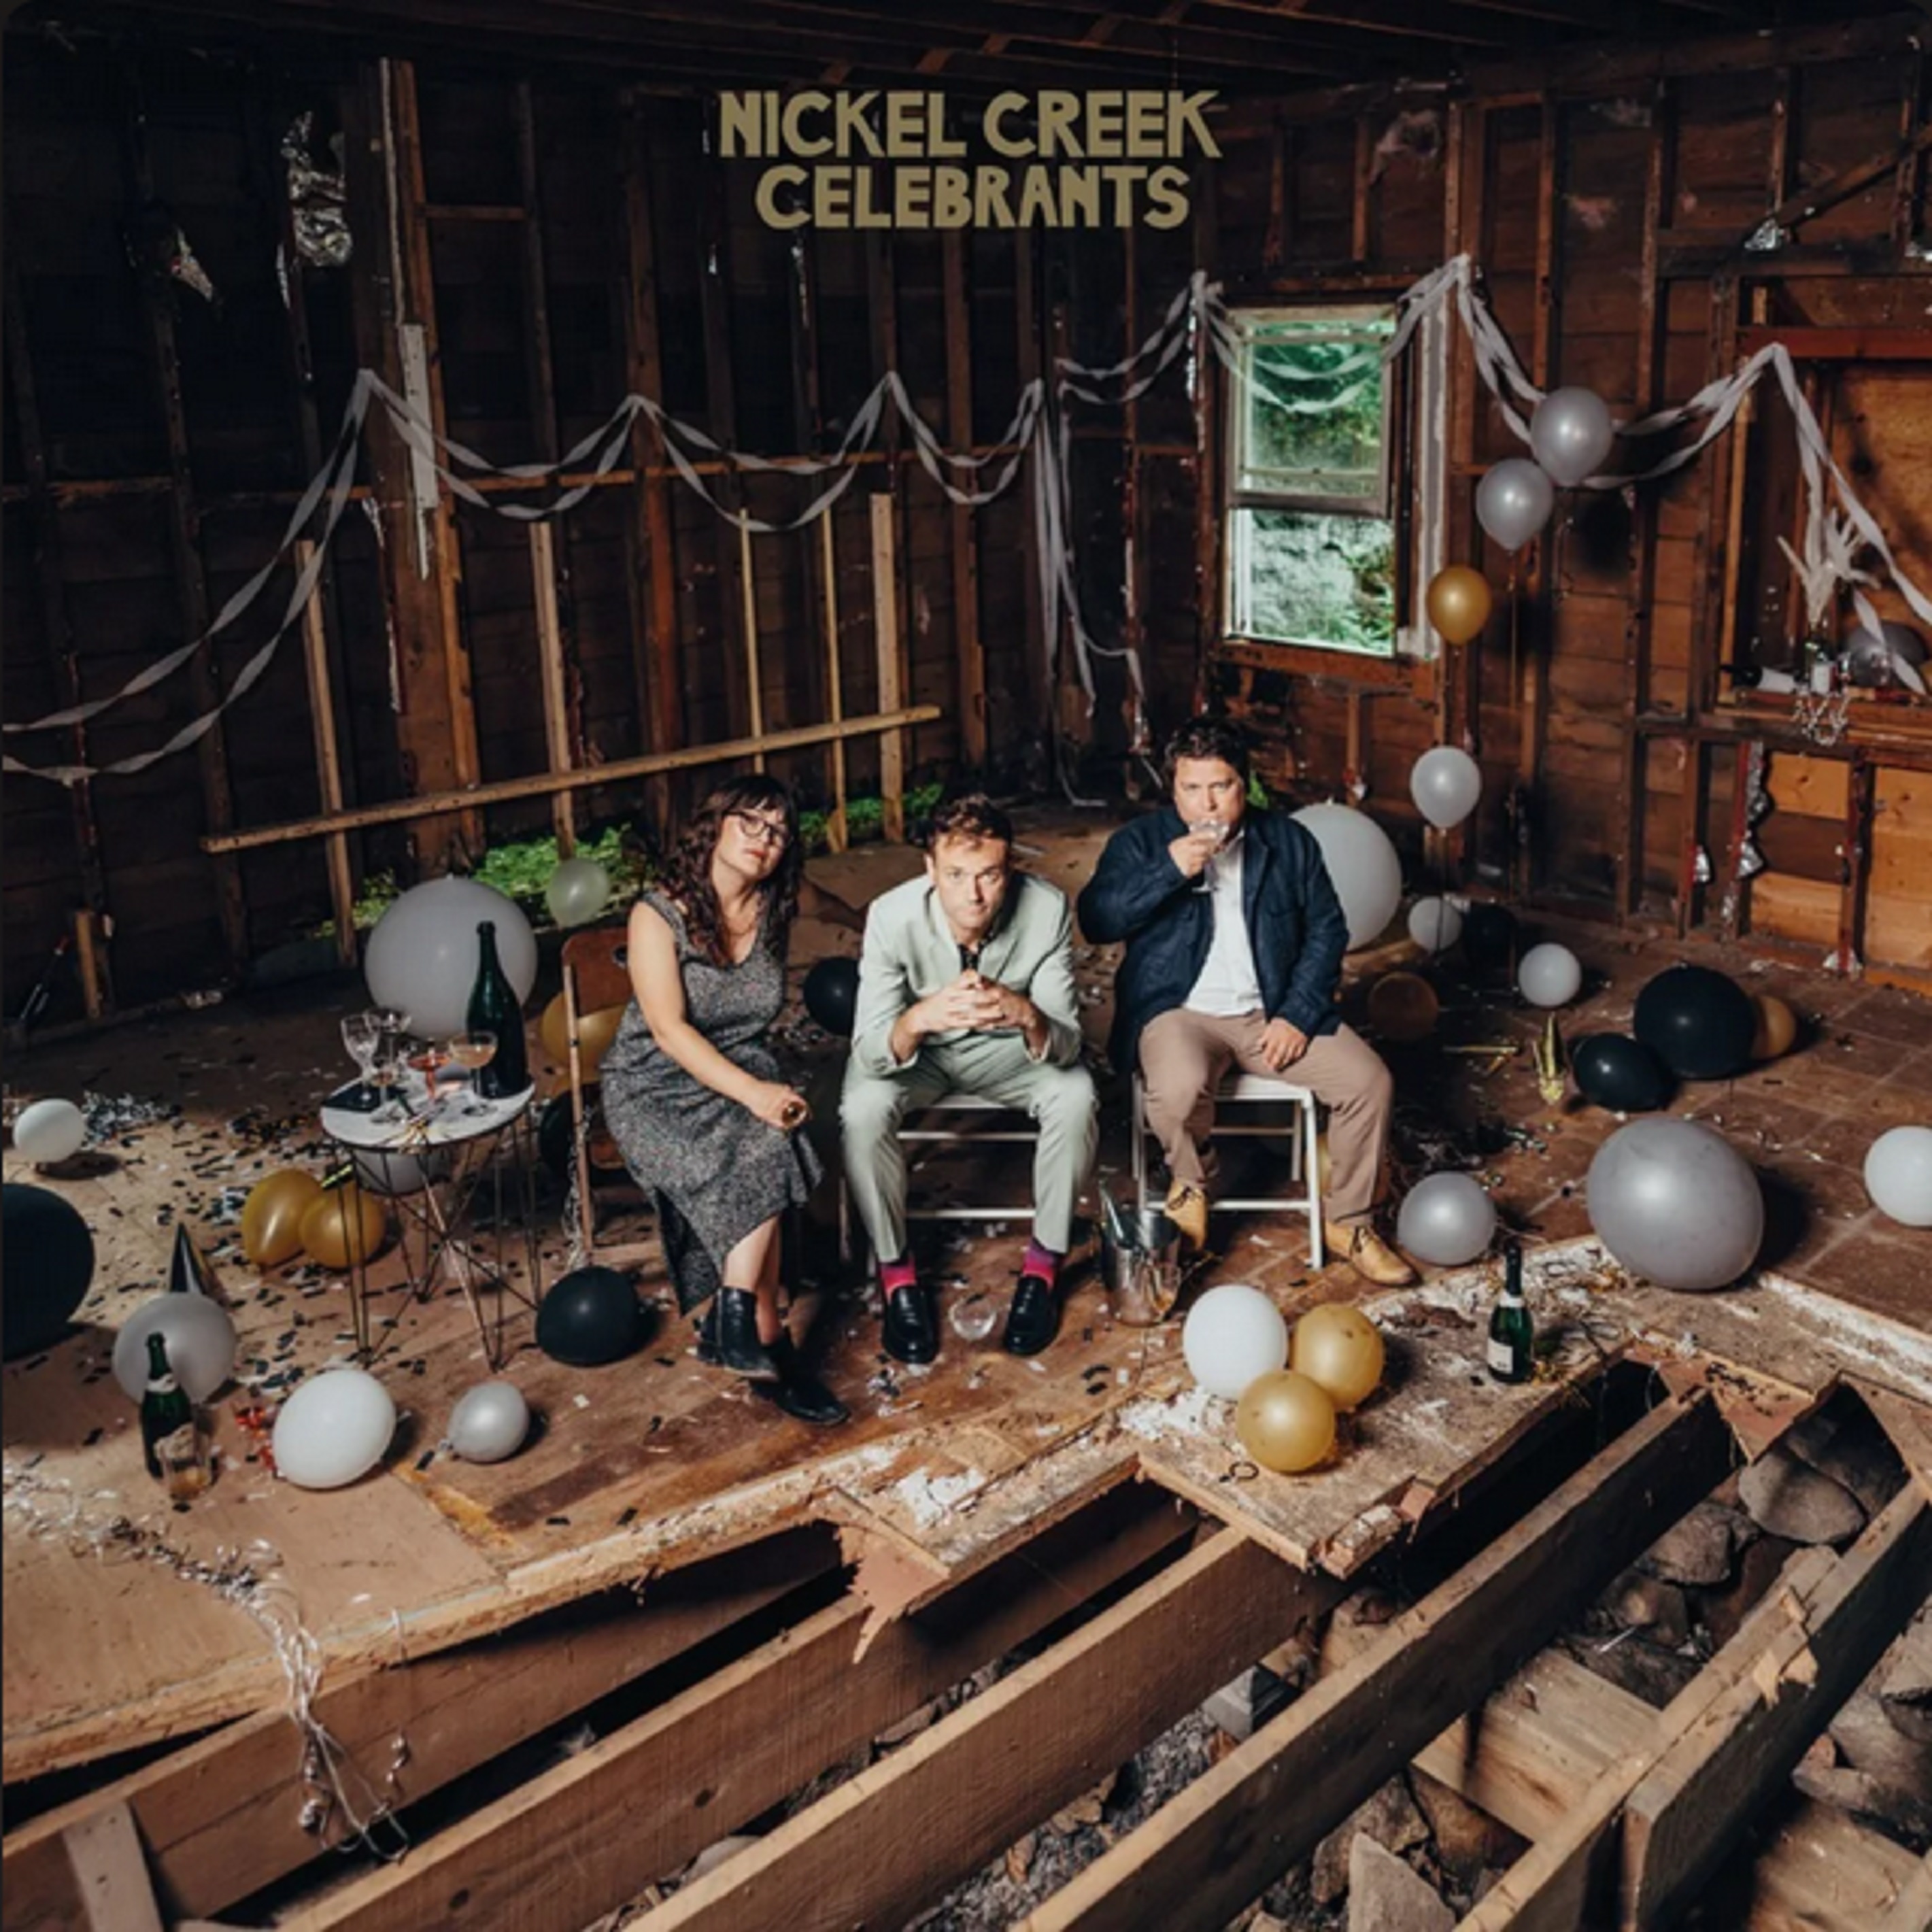 Nickel Creek returns with first new album in nine years: "Celebrants" out March 24, first single “Strangers” debuts today